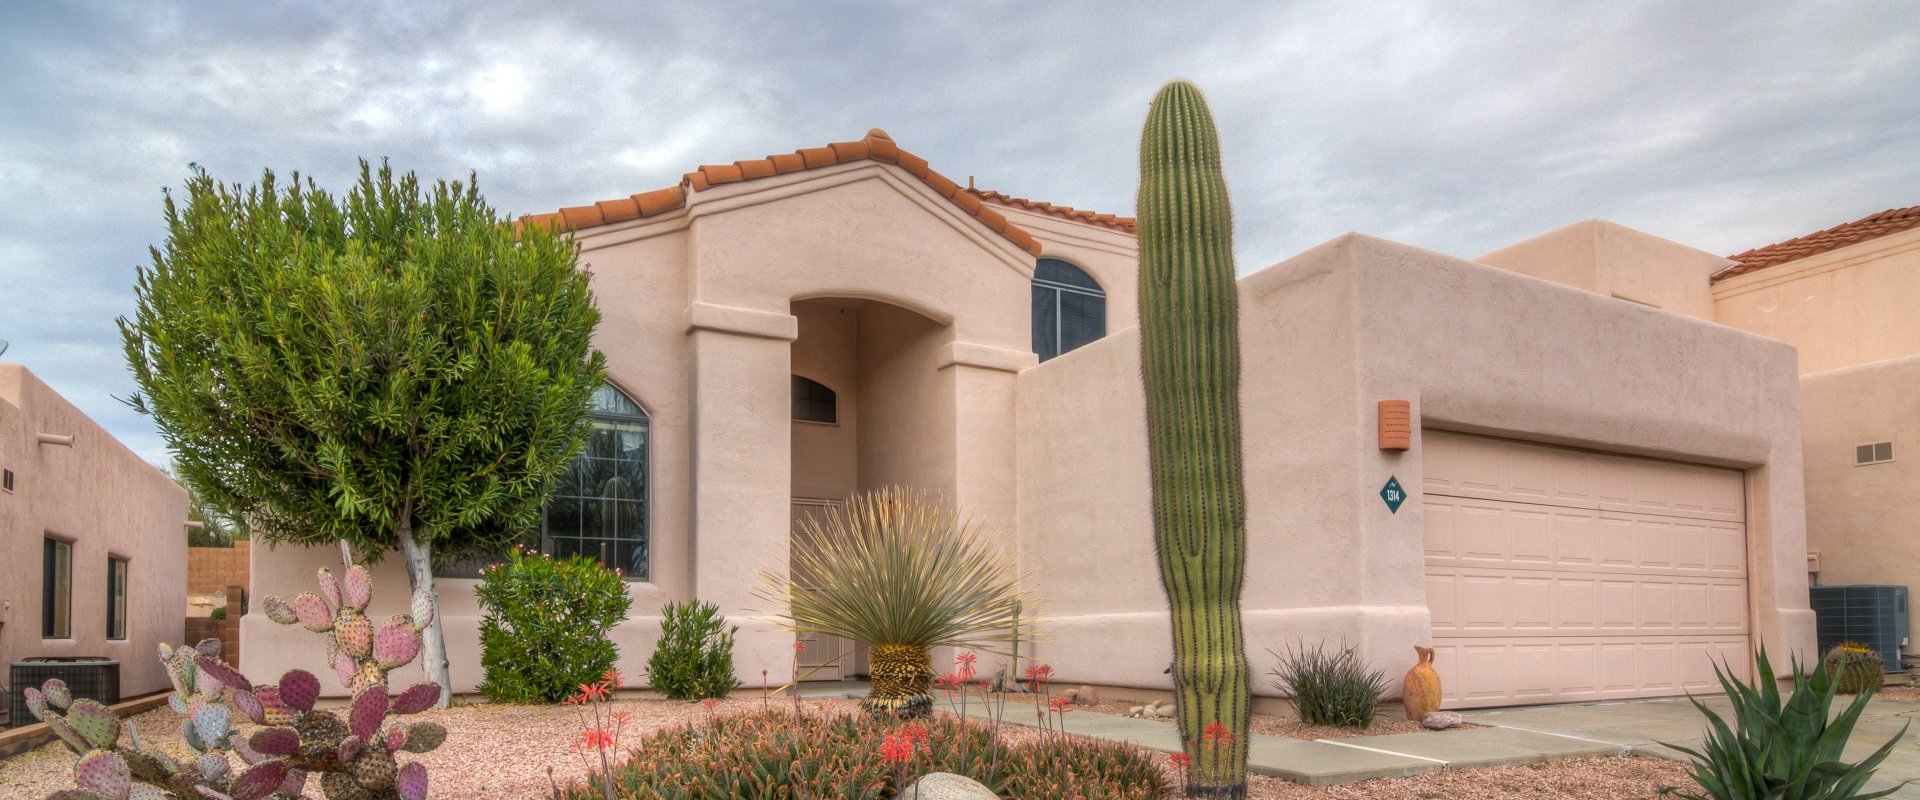 Sell Tucson House Fast